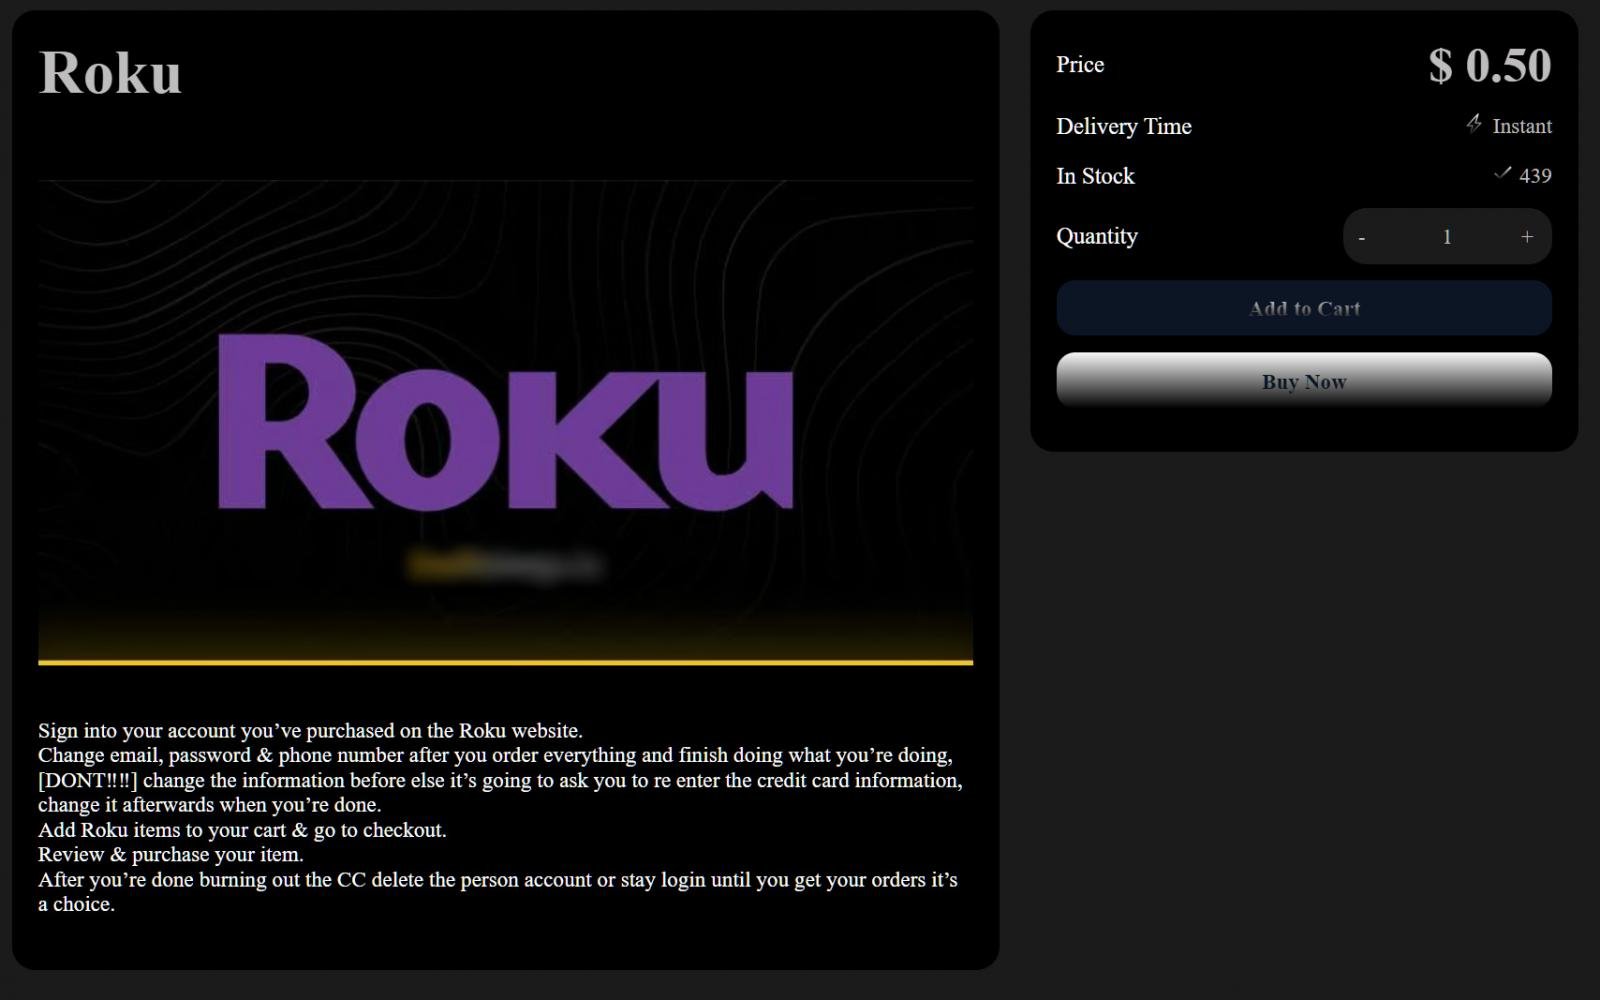 Stolen Roku accounts sold for as little as $0.50